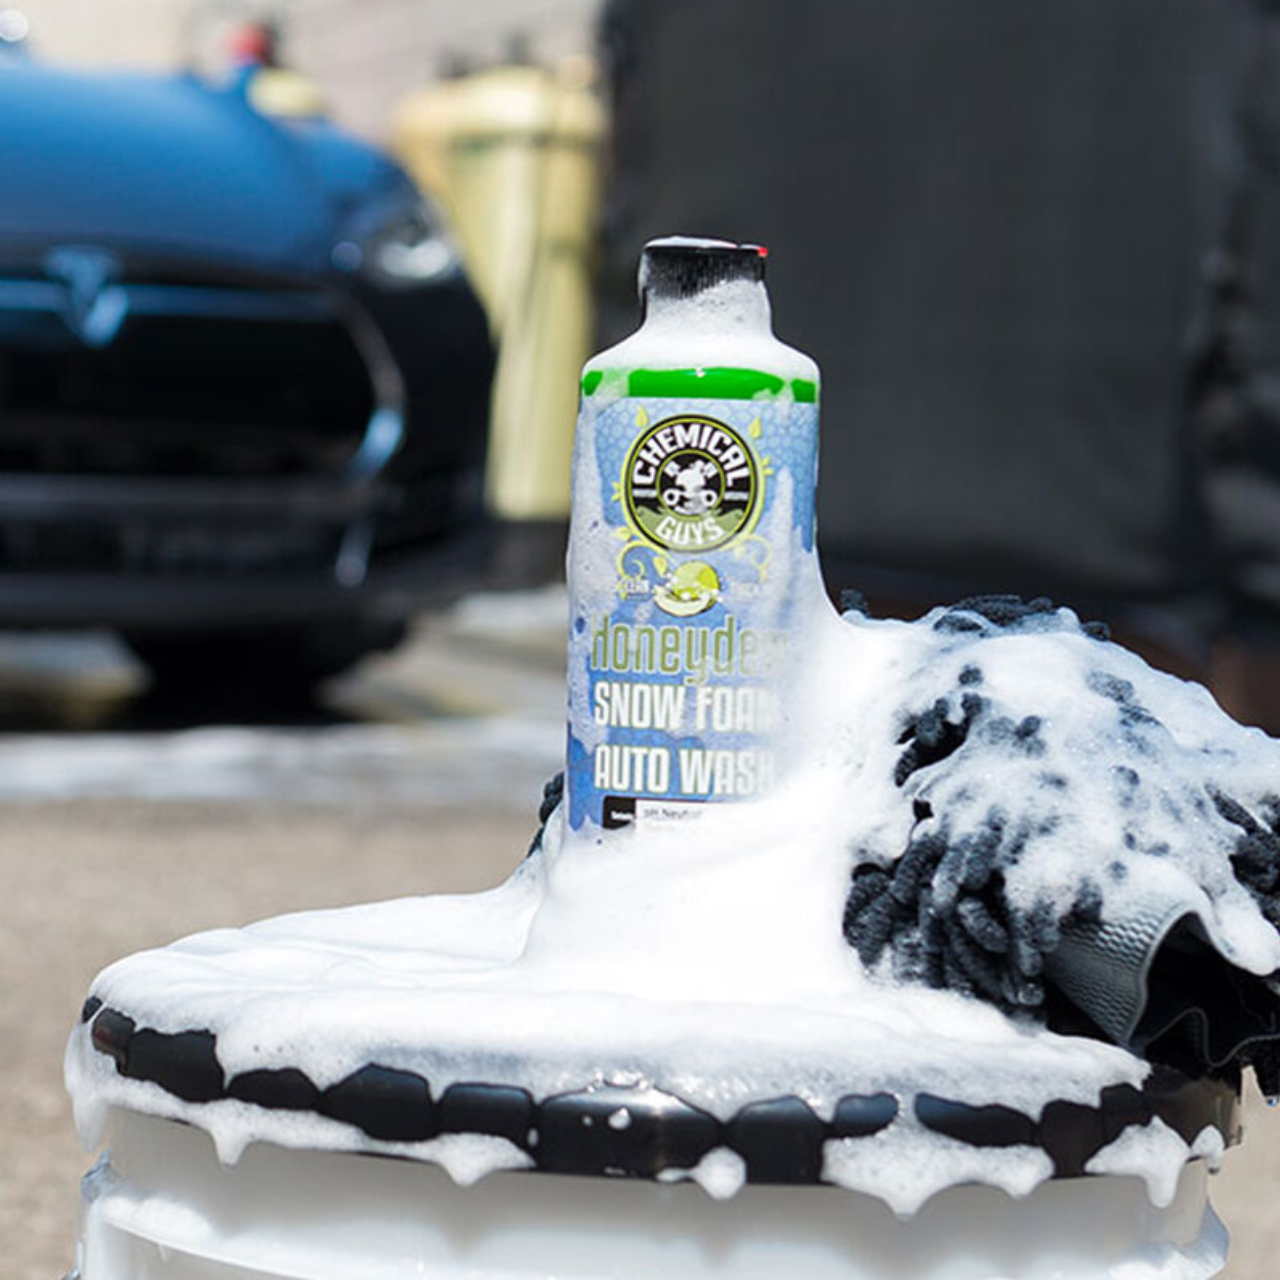 Chemical Guys car wash products are on sale at